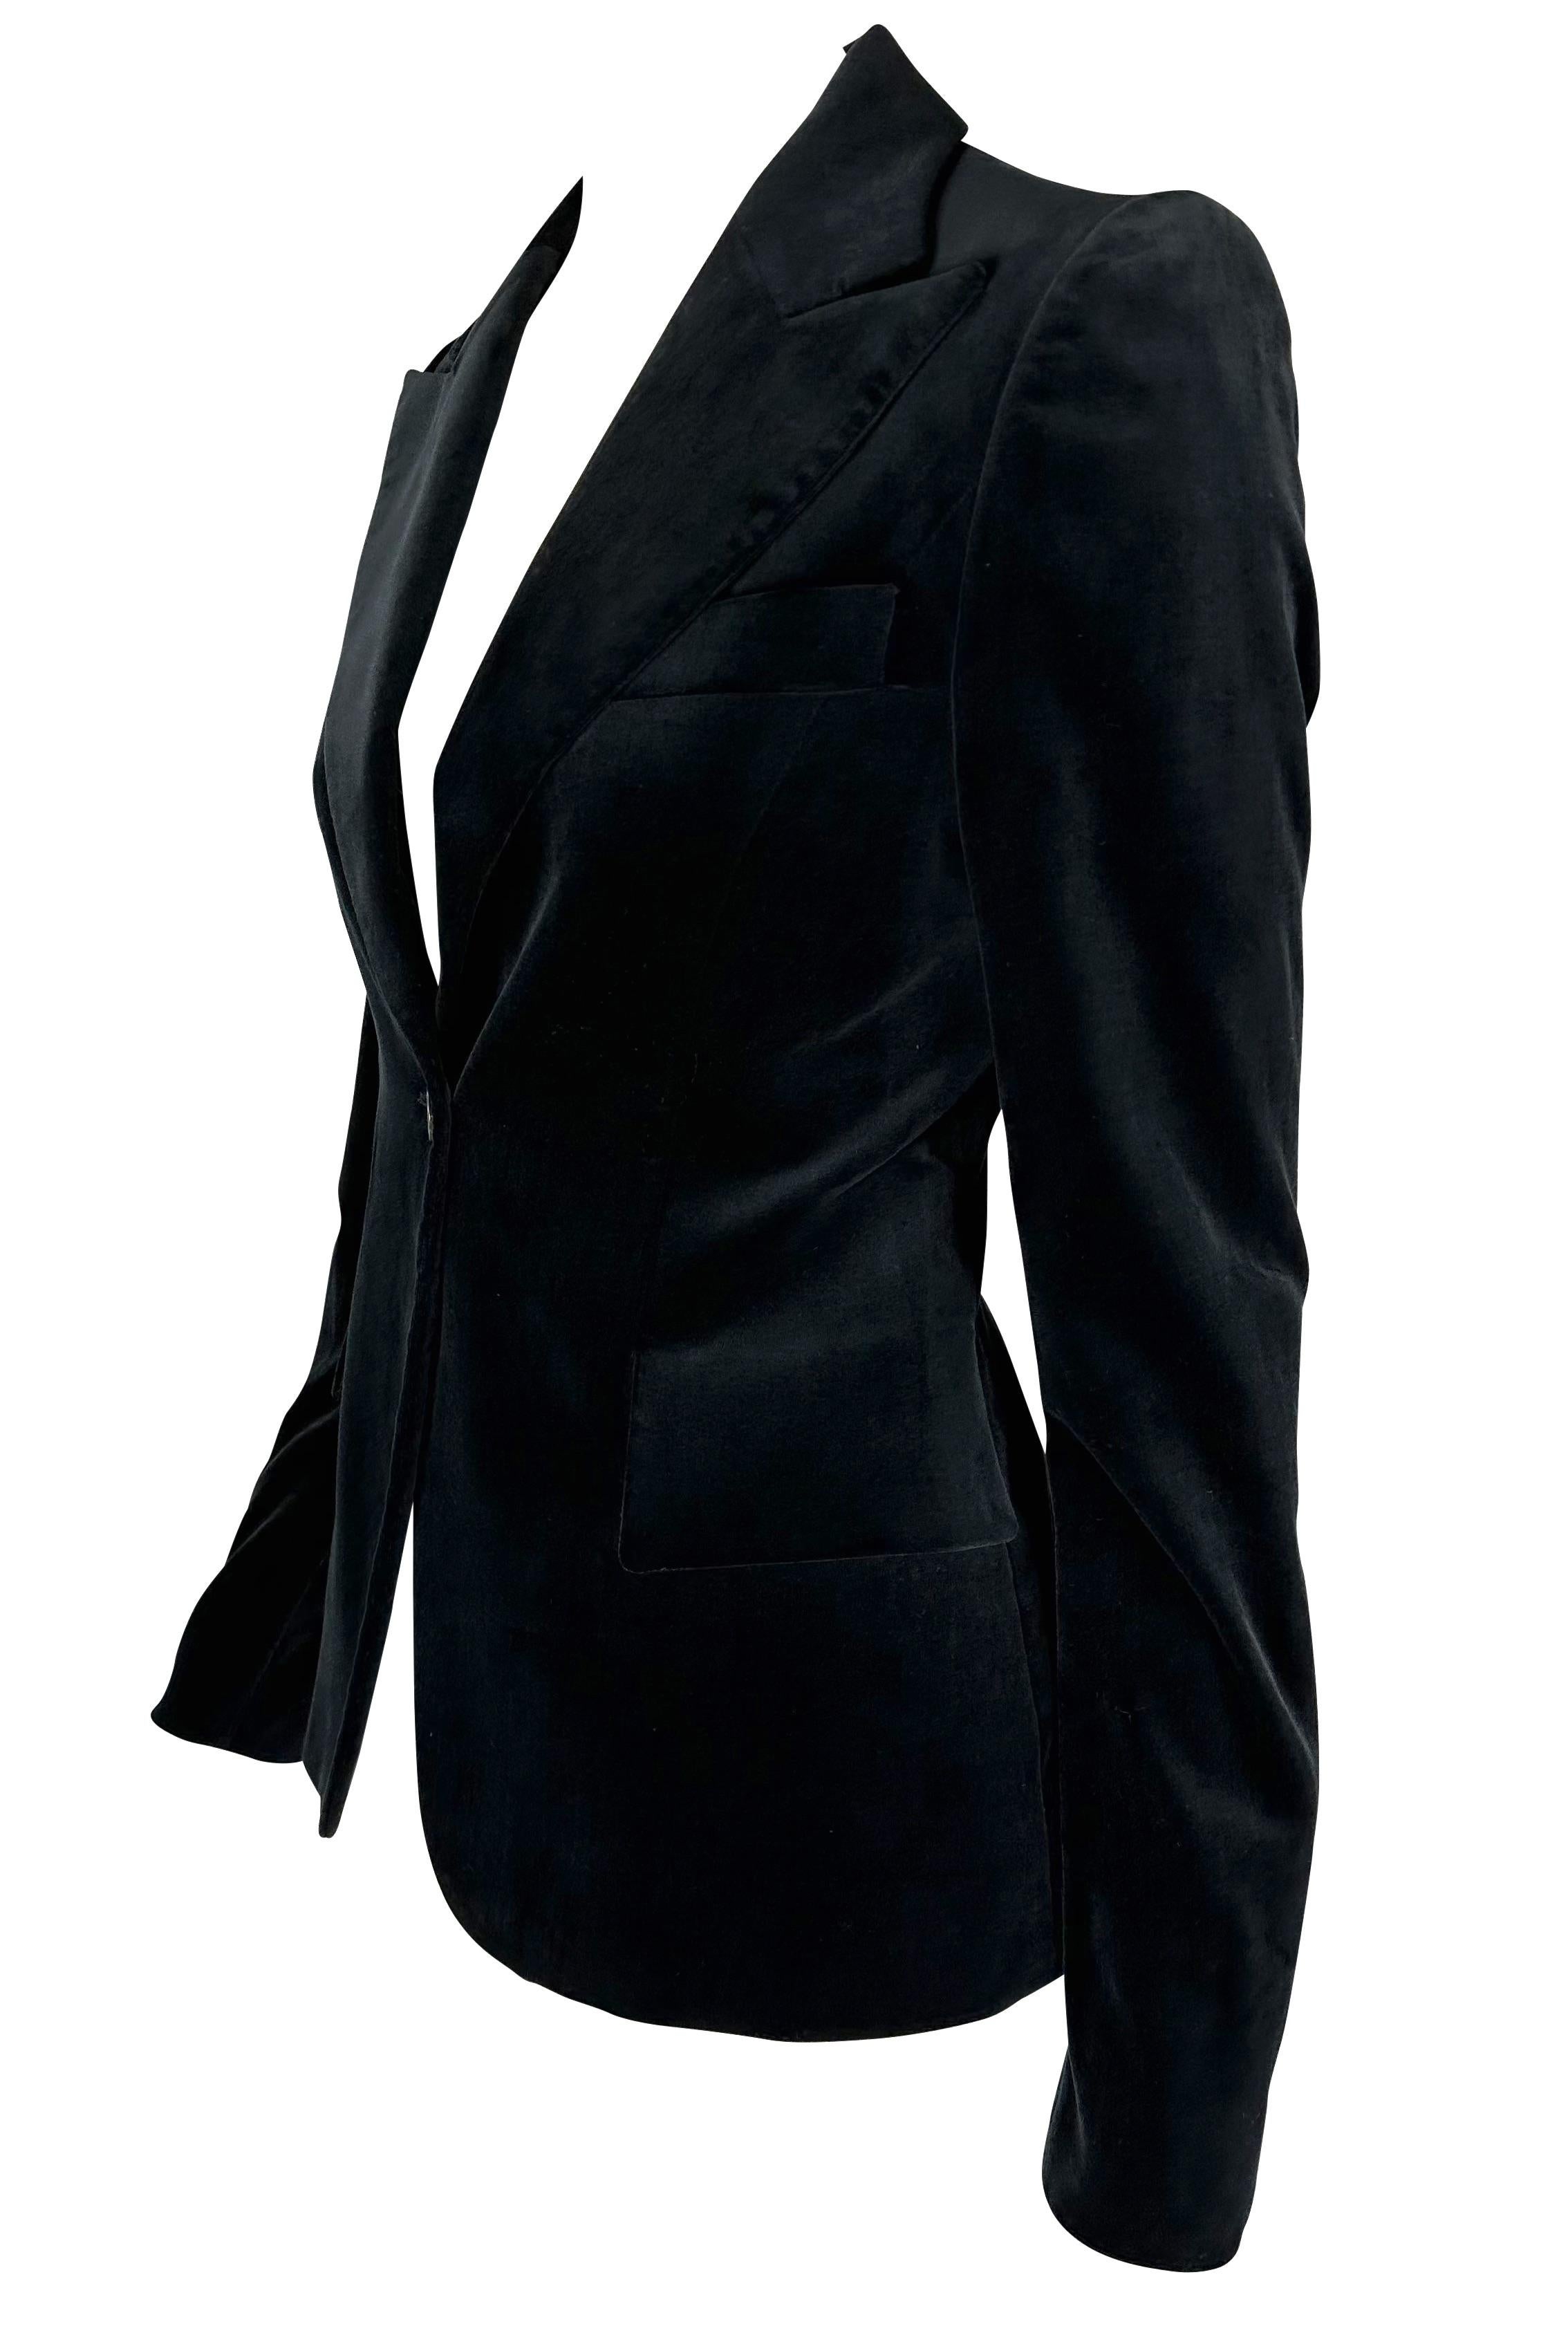 Presenting a beautiful black Gucci velvet blazer, designed by Tom Ford. From the Fall/Winter 2003 collection, this fabulous velvet jacket features a single button closure at the front and is the perfect chic addition to any wardrobe! 

Approximate